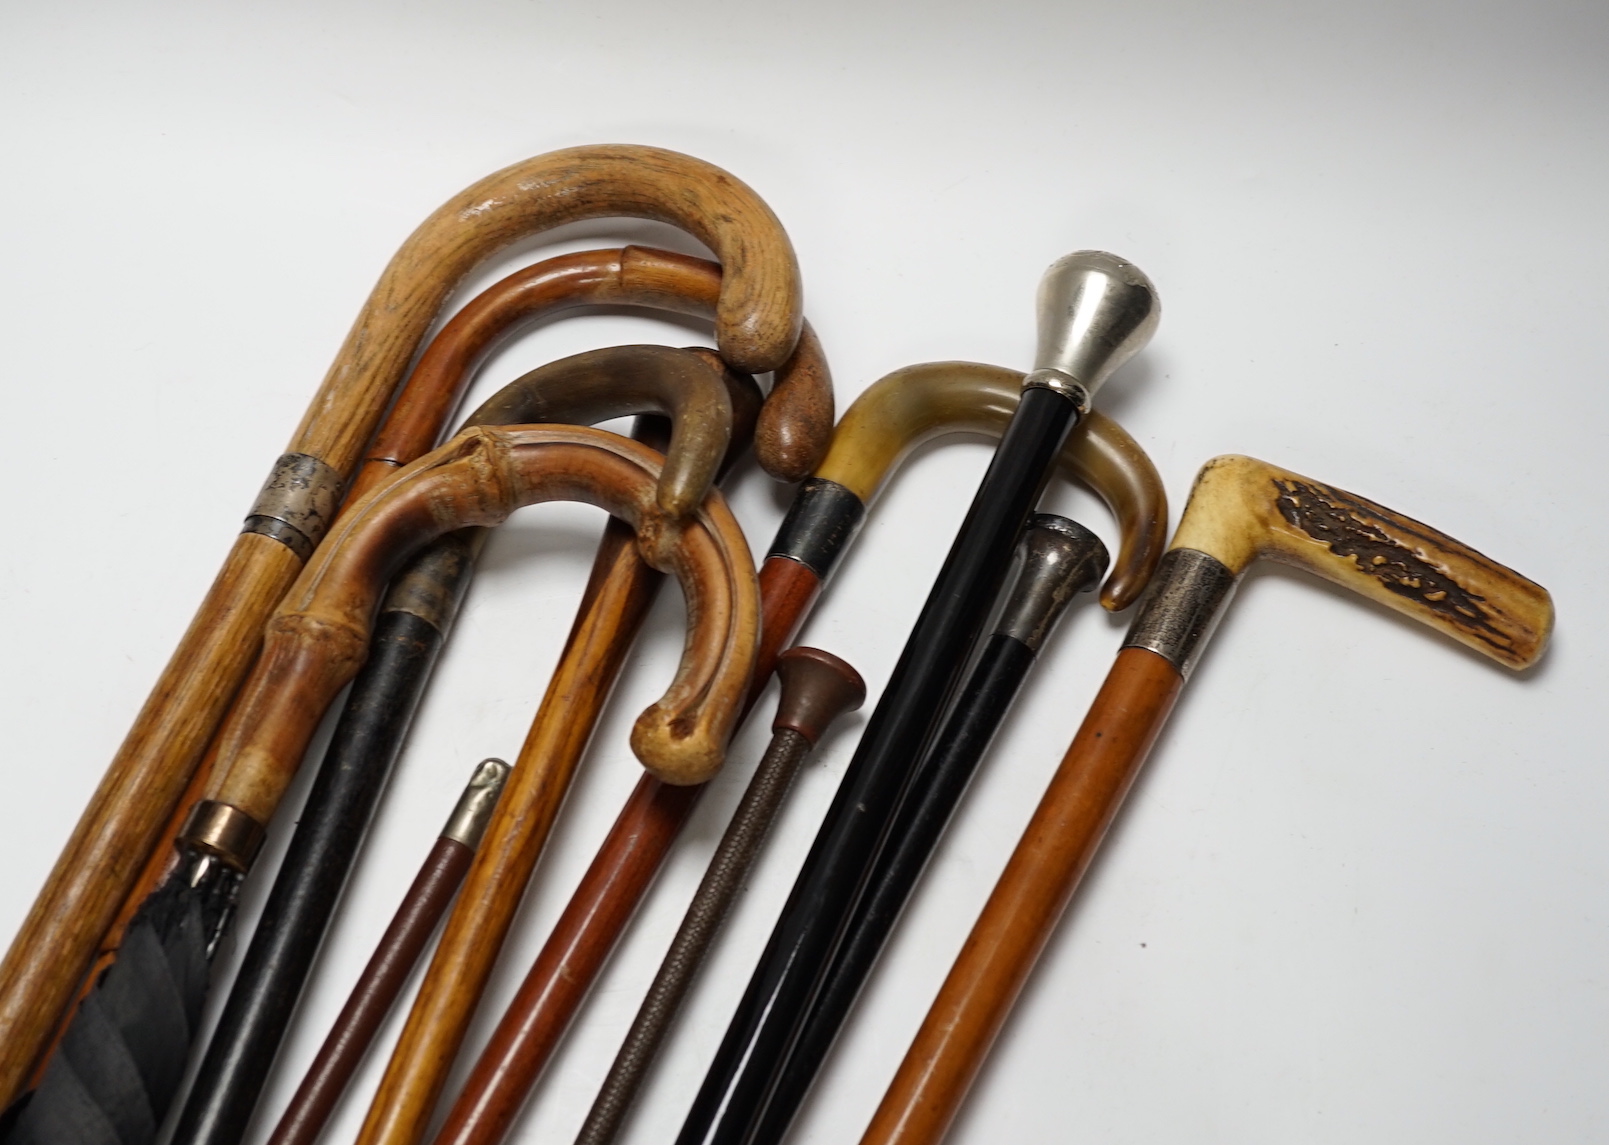 Eleven walking sticks, canes and riding crops, three with horn handles, longest 89cm